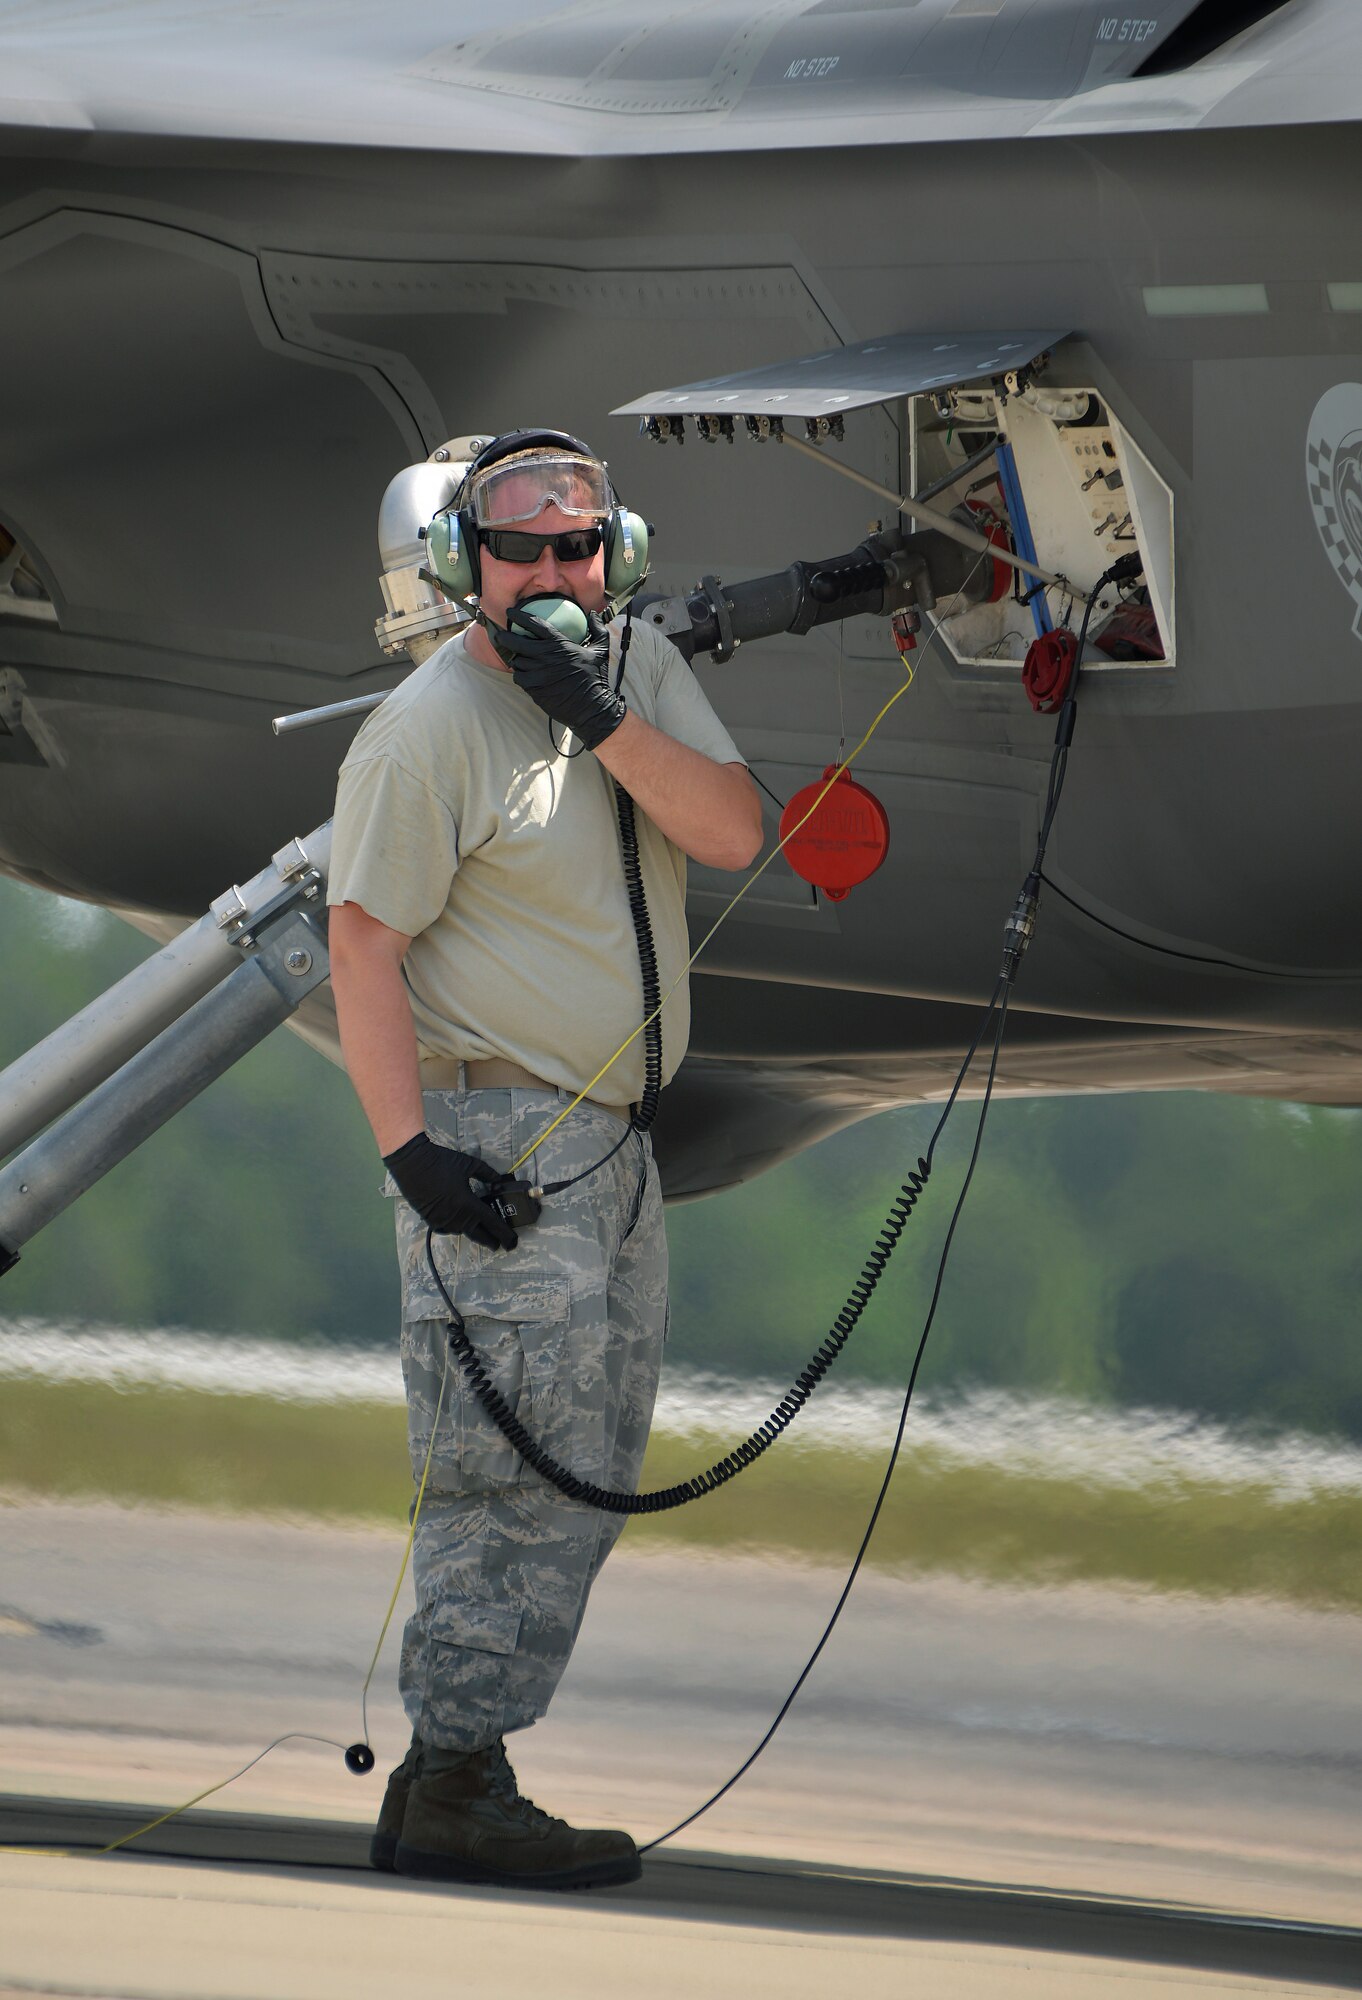 Senior Airman Max Todd, 33rd Aircraft Maintenance Squadron crew chief, speaks to an F-35A Lightning II pilot over the radio during a hot pit refueling at Eglin Air Force Base, Fla., May 13, 2016. While refueling, maintenance Airmen communicate with pilots to gauge how much fuel is loaded into the jet. A hot pit refuel allows aircraft to quickly re-launch for a sortie by fueling with the engine running. (U.S. Air Force photo/Senior Airman Andrea Posey) 